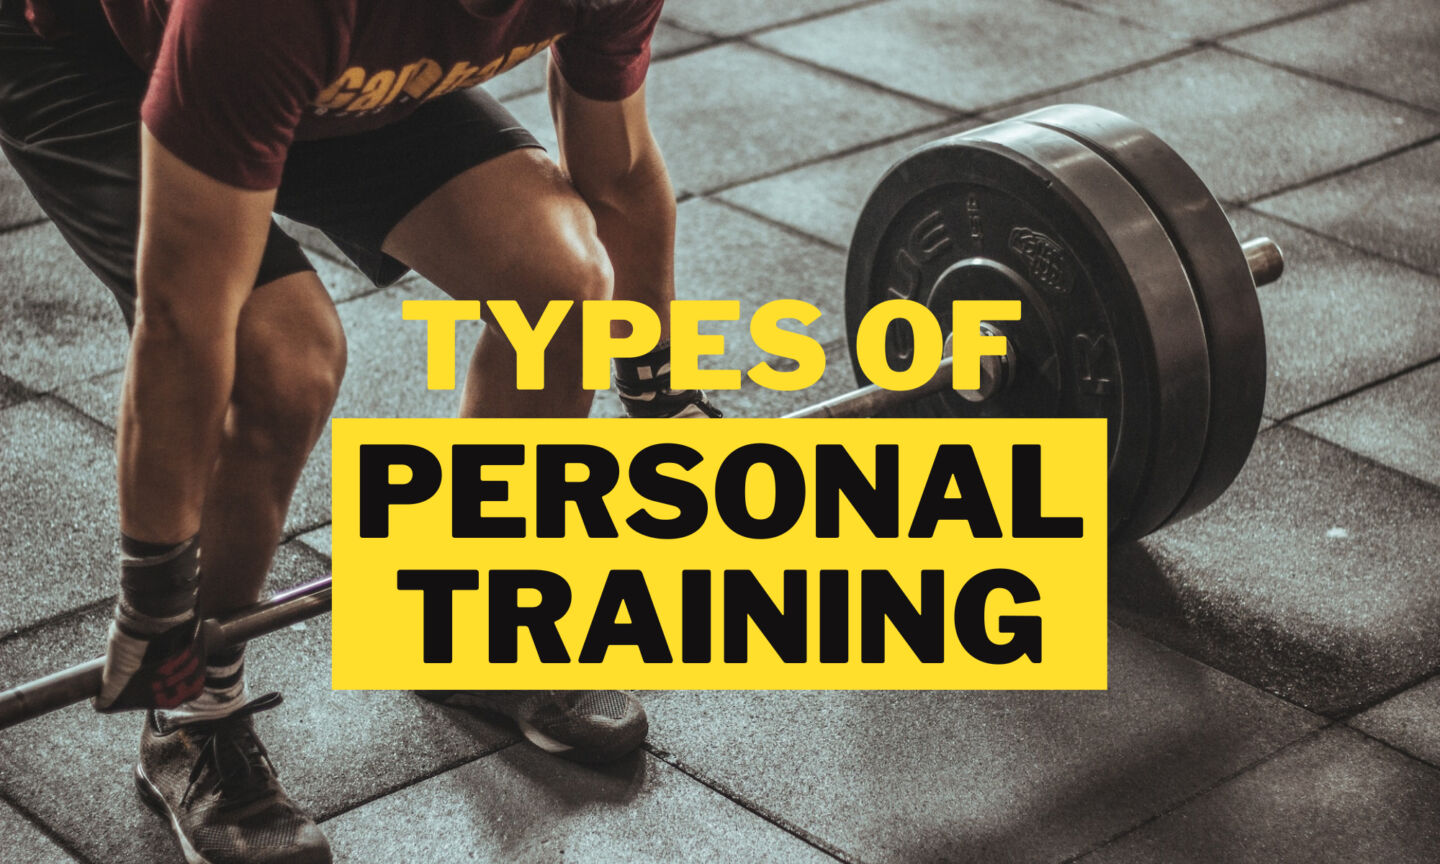 Types of personal training